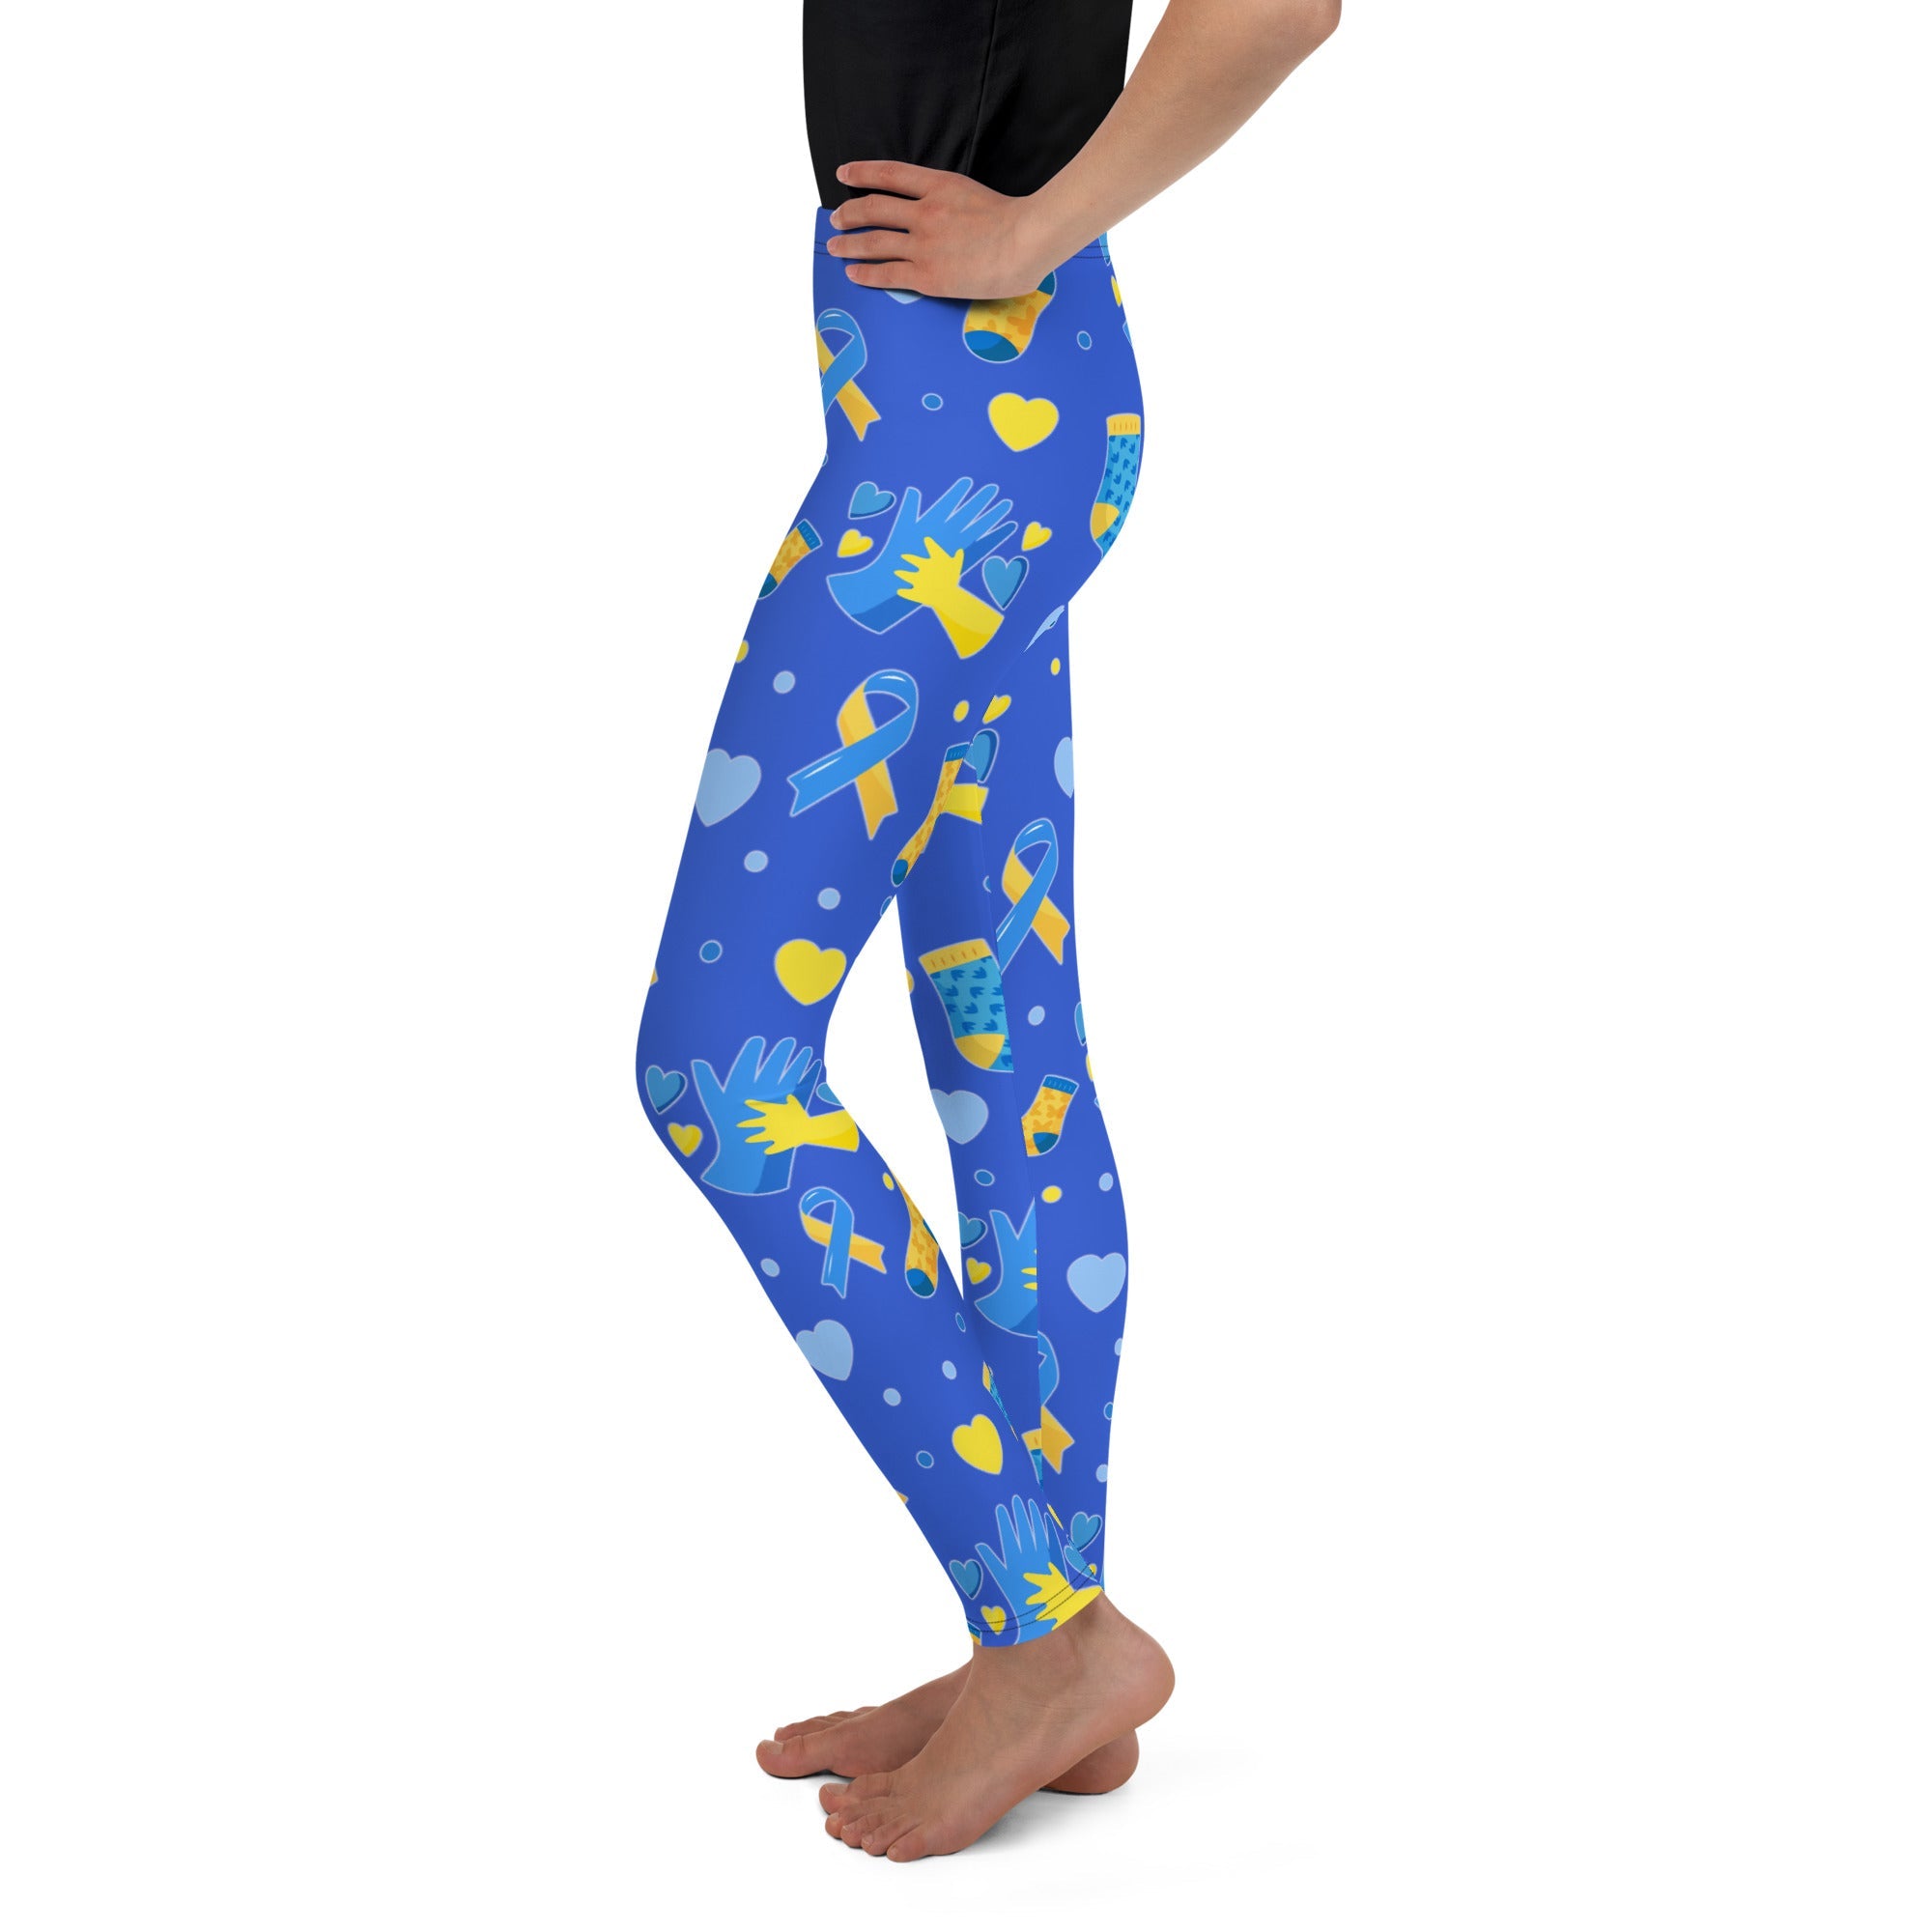 Down Syndrome Awareness Youth Leggings